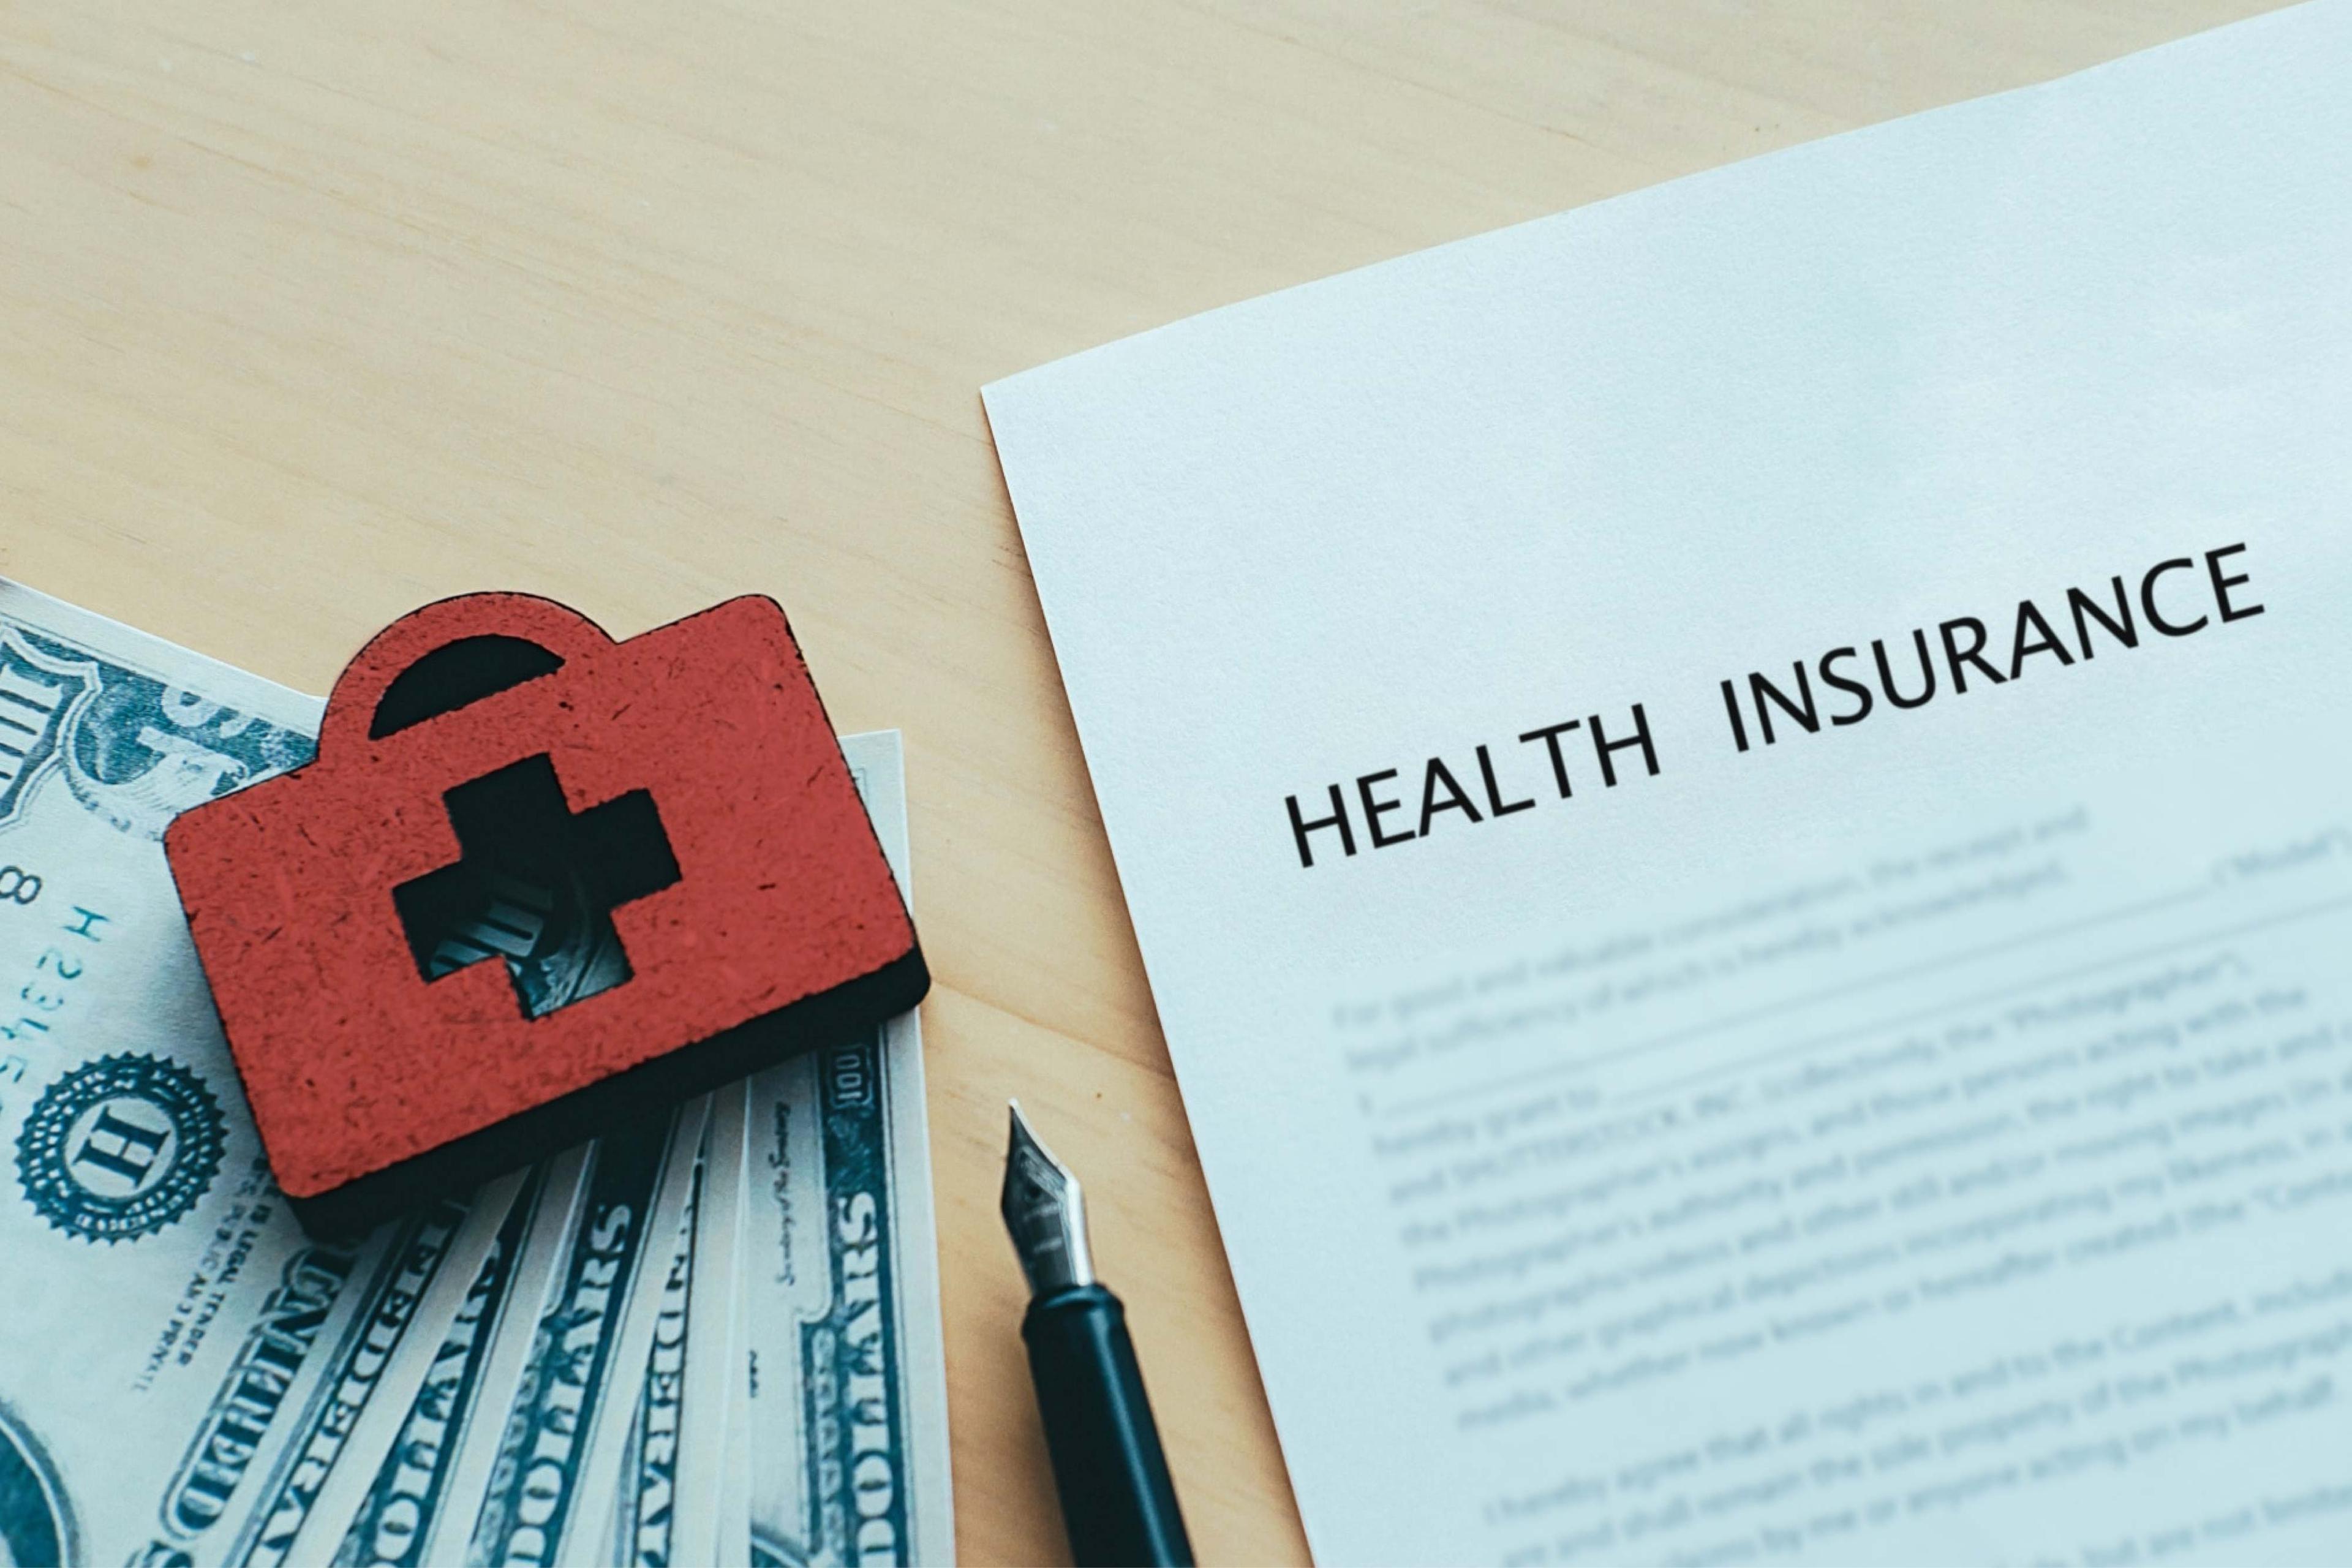 Diseases Under The Health insurance: A Detailed List